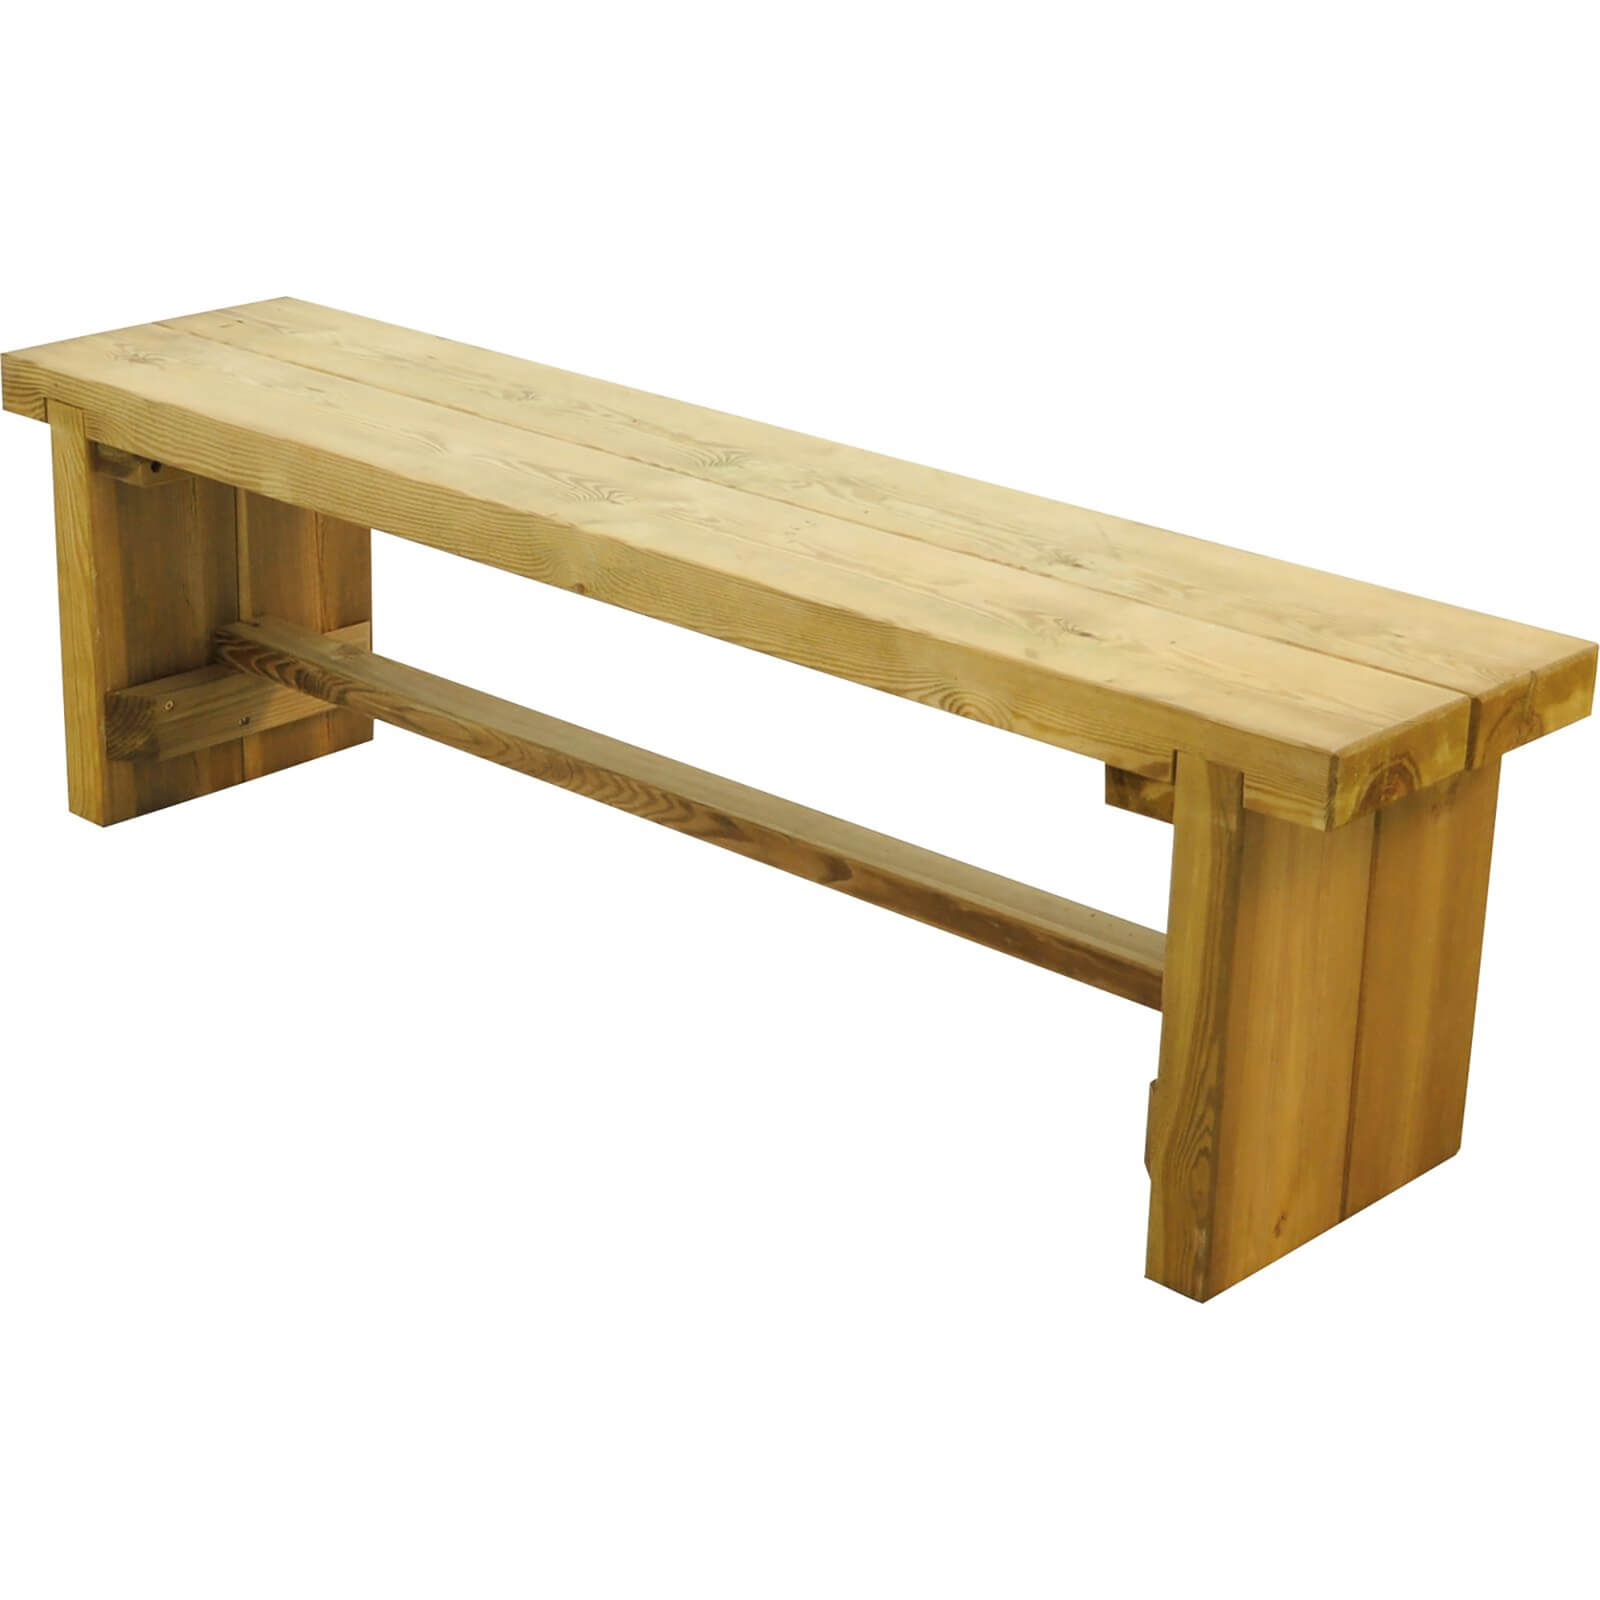 Forest Double Wooden Sleeper Bench - 1.2m